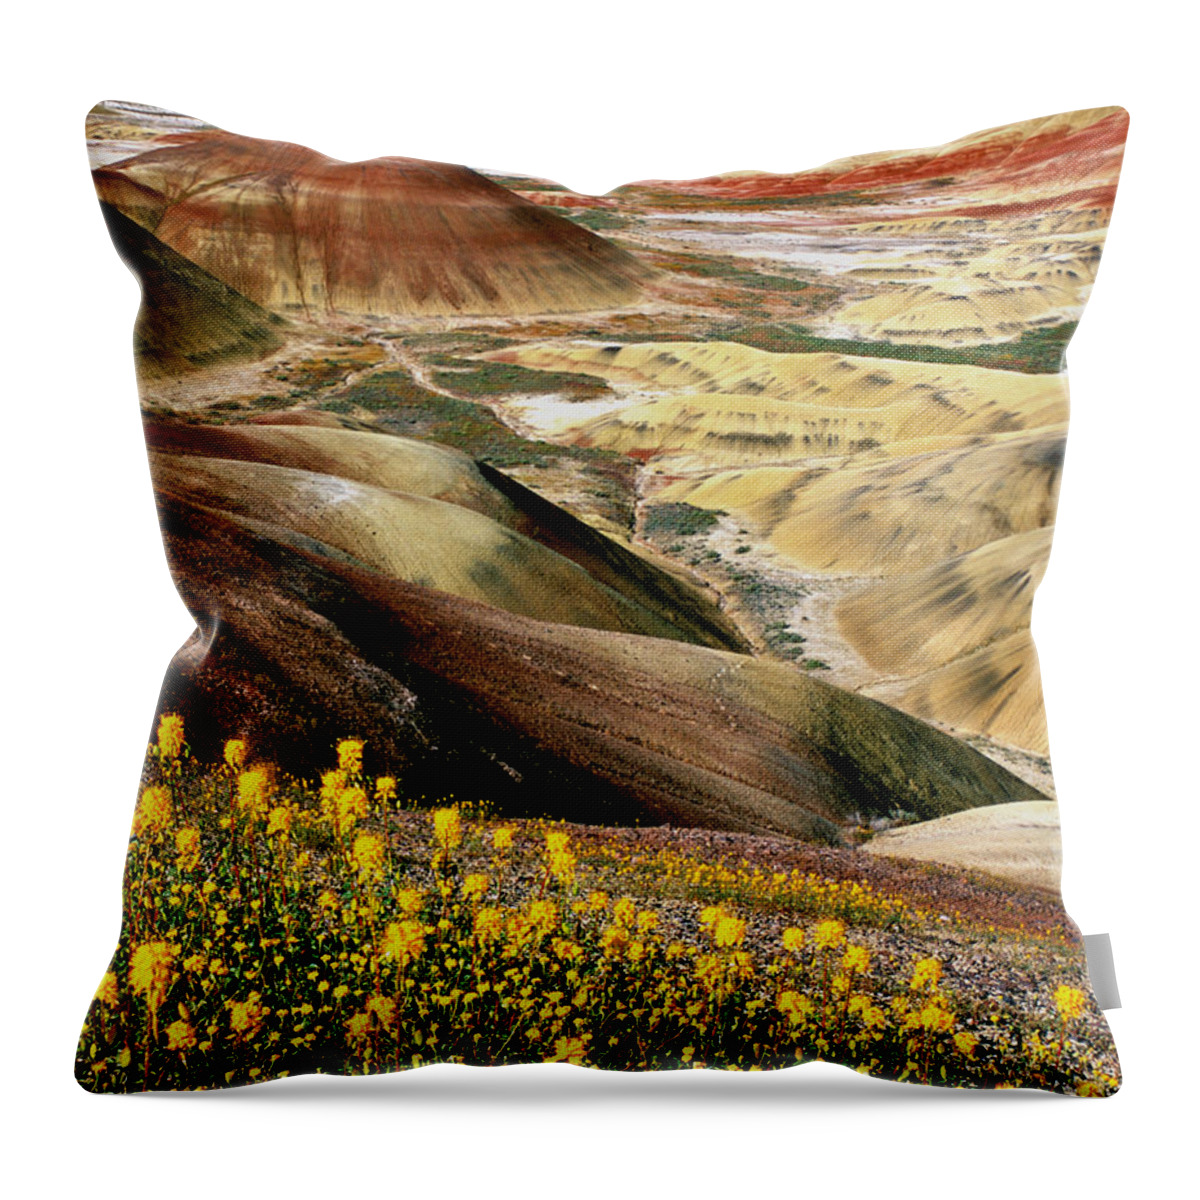 John Day Painted Hills Throw Pillow featuring the photograph John Day Painted Hills Oregon by Ed Riche